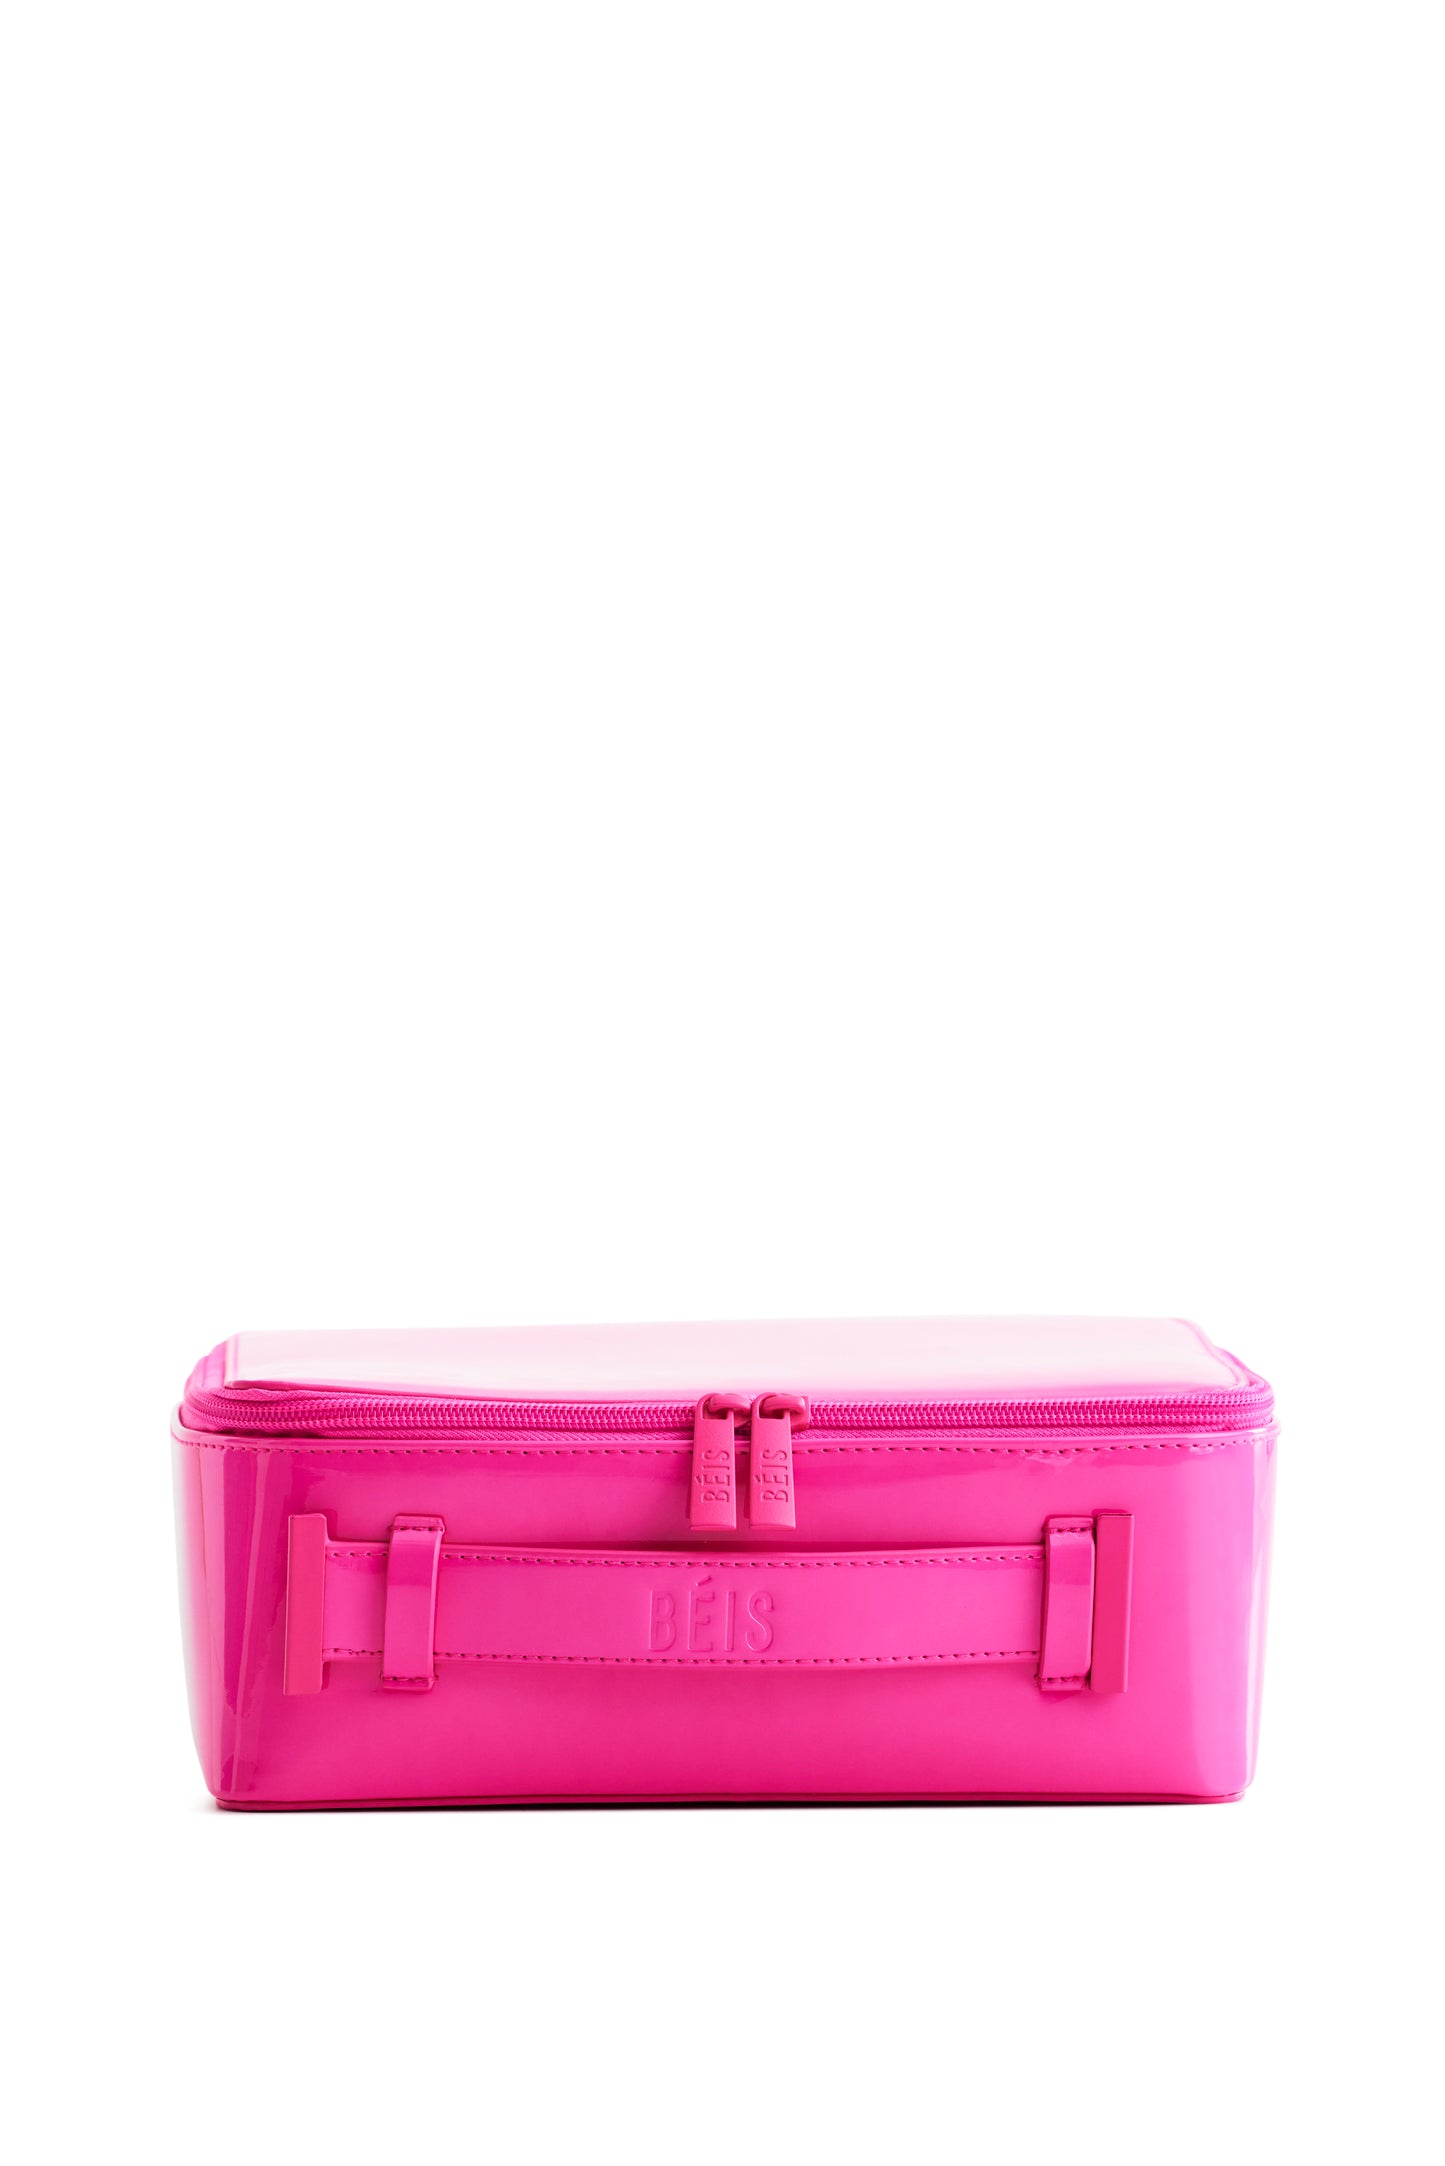 The Cosmetic Case in Barbie™ Pink